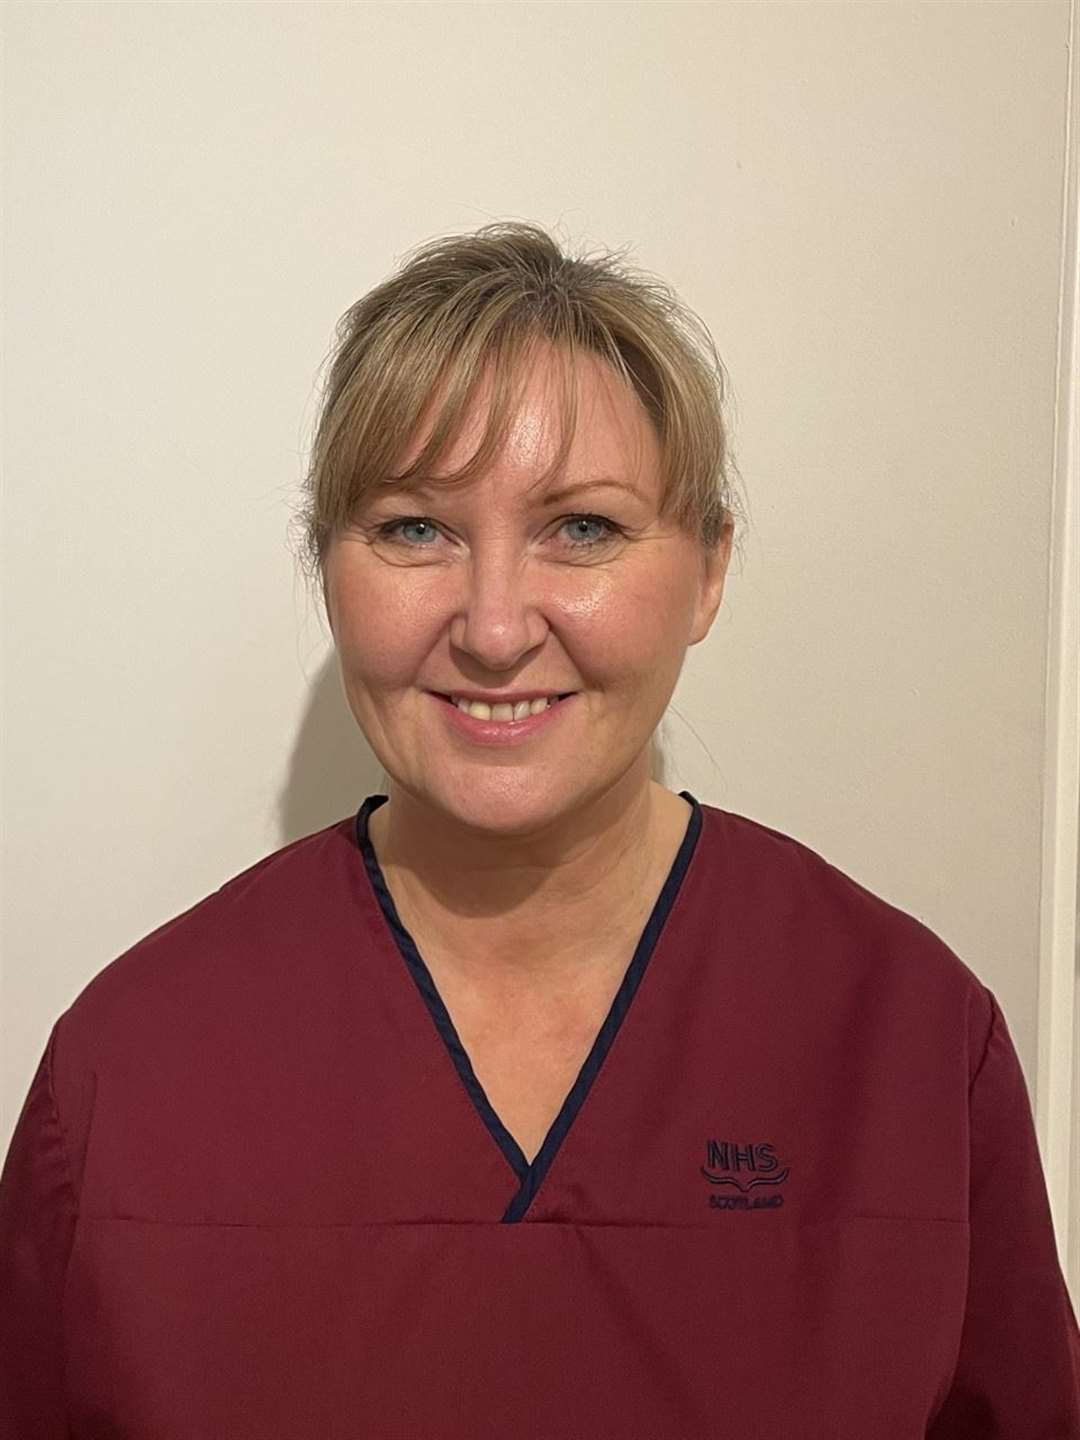 Katrina Morrison, NHS Grampian clinical lead nurse for the Covid-19 vaccination programme.